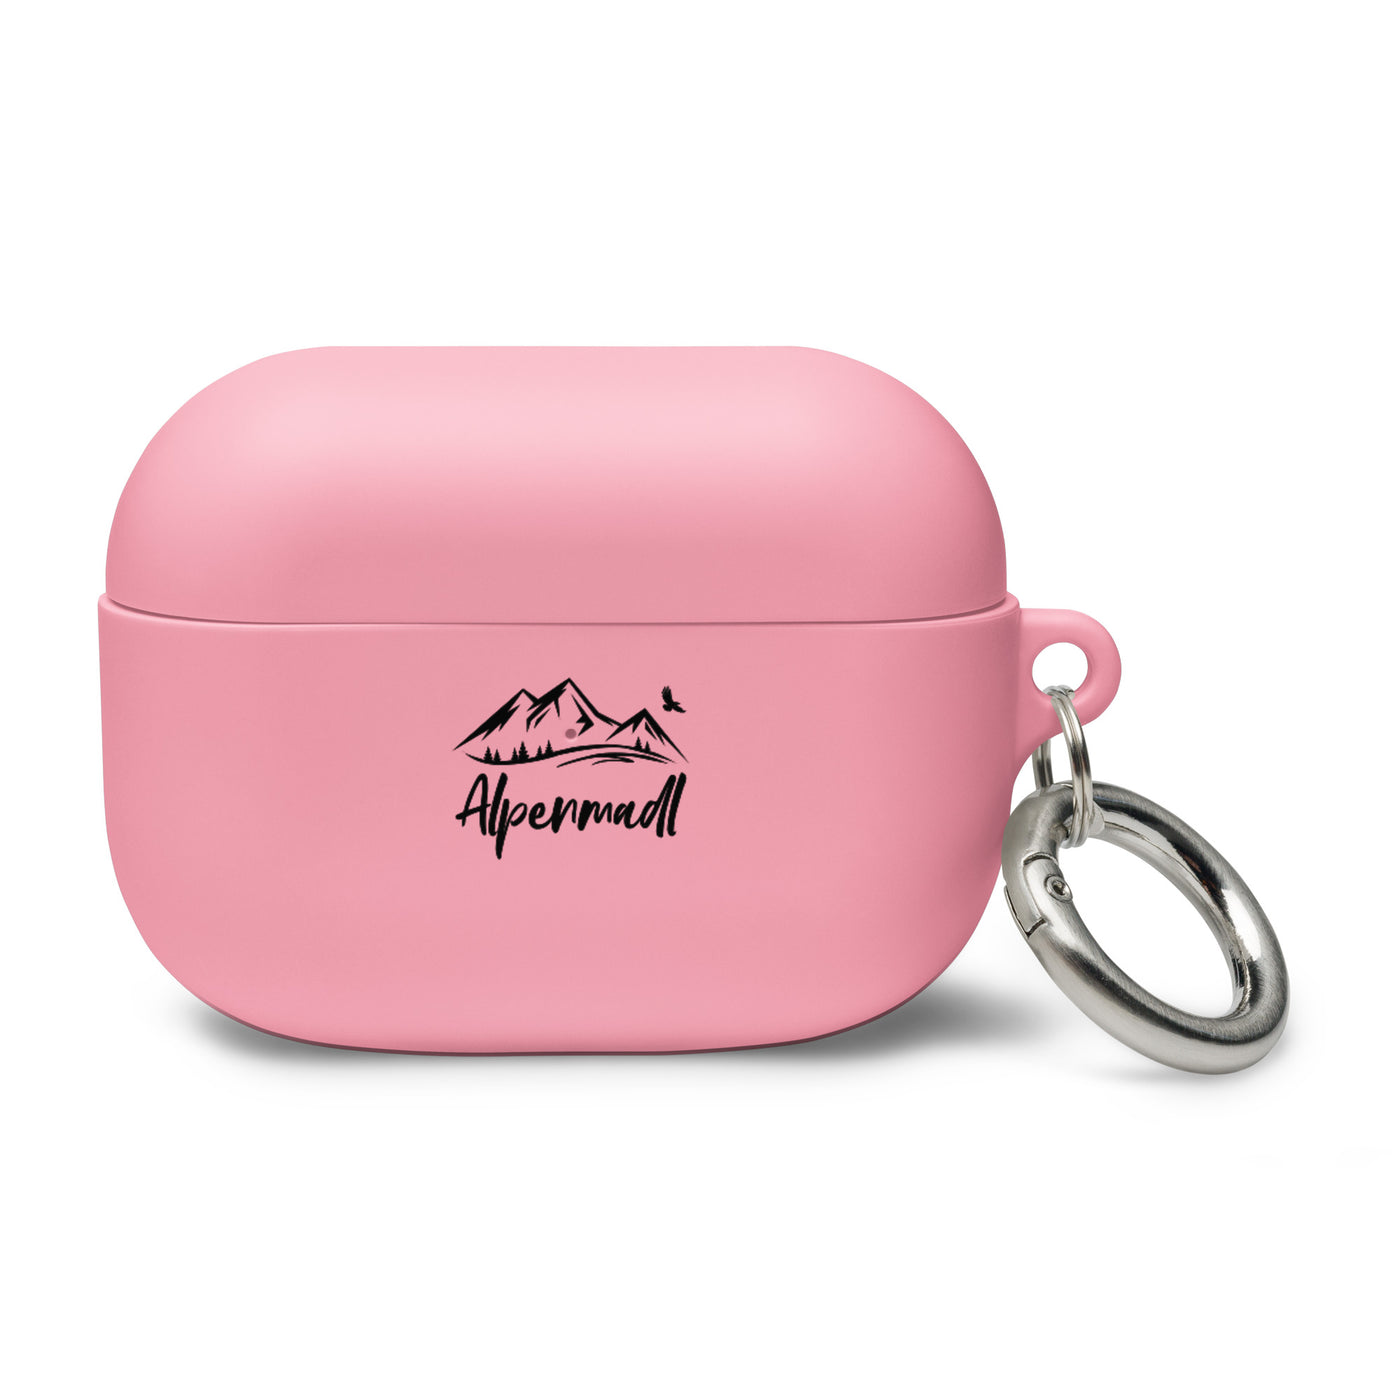 Alpenmadl - AirPods Case berge Pink AirPods Pro